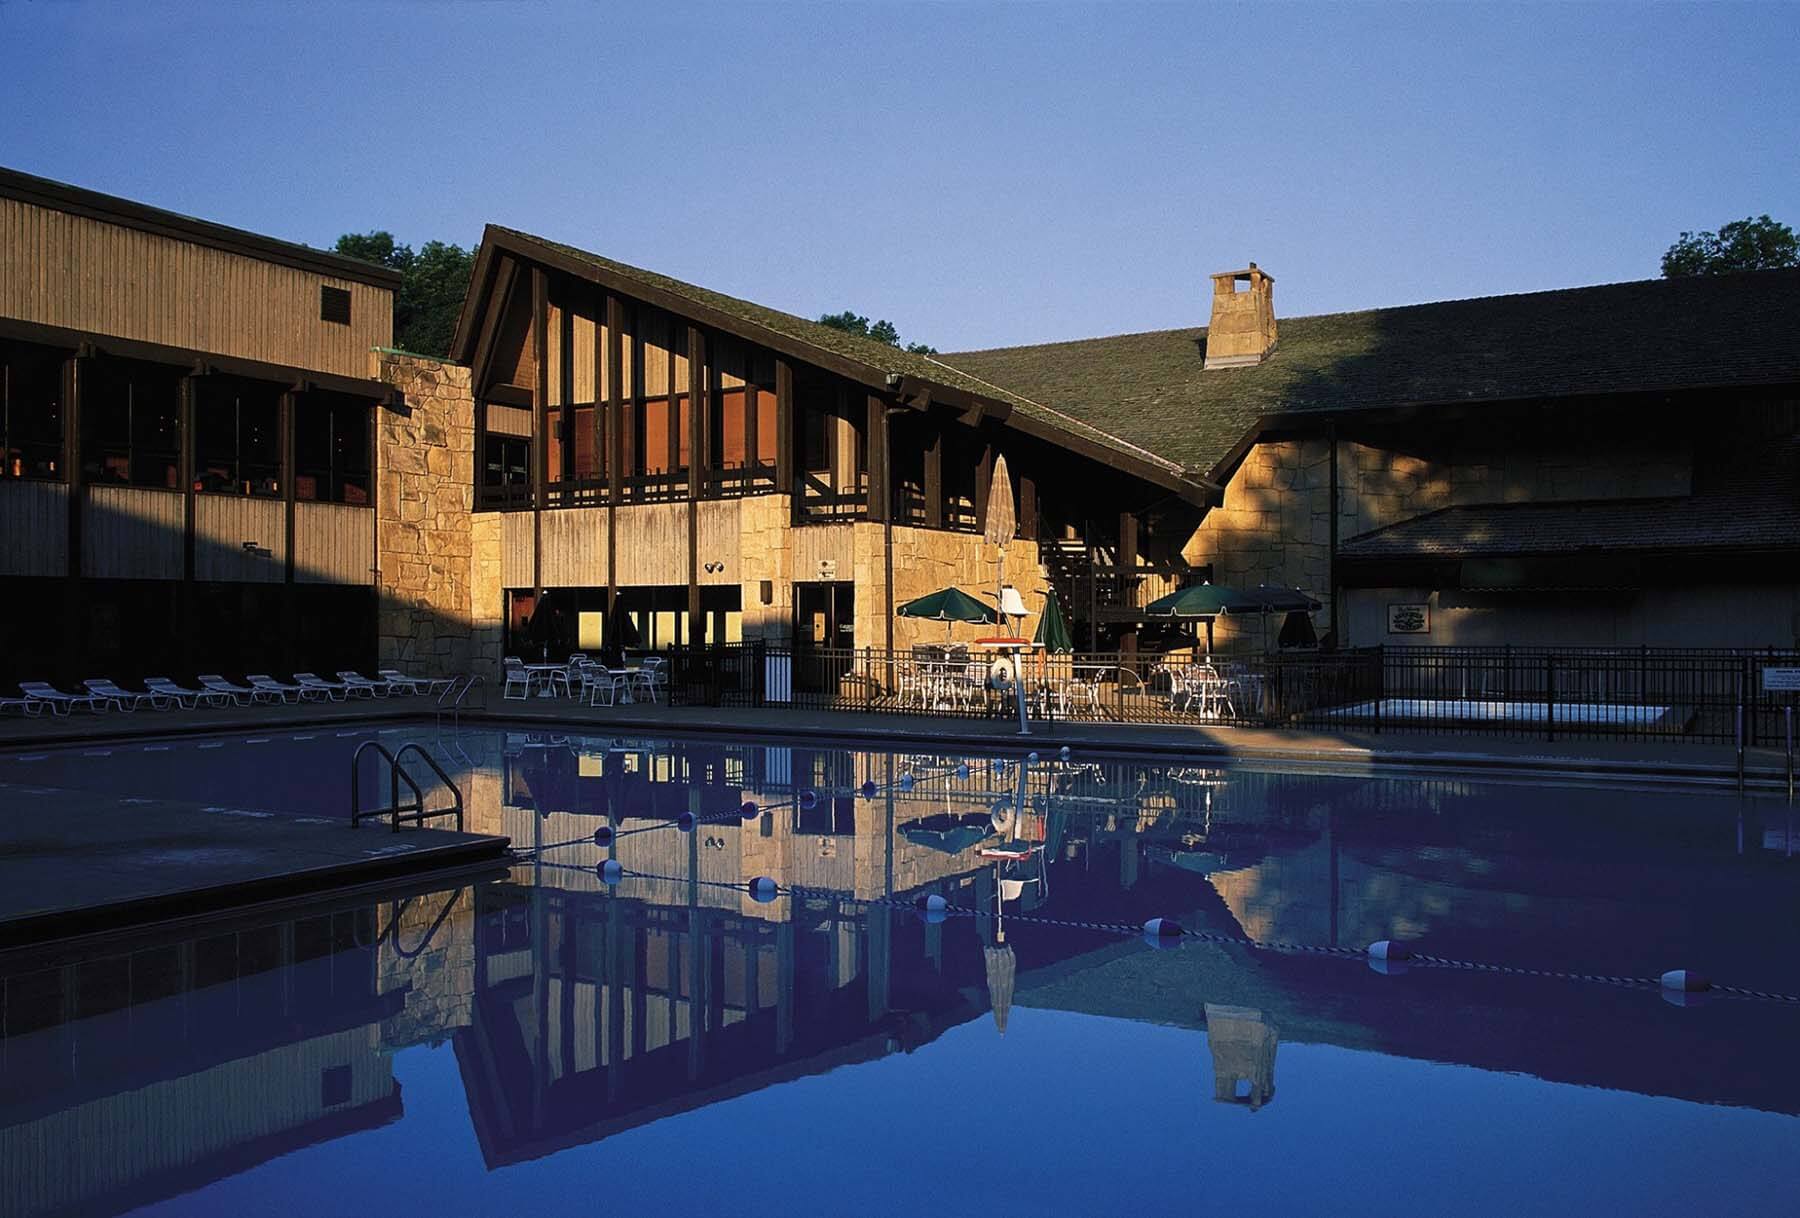 Mohican Lodge at sunset with a view of the outdoor pool